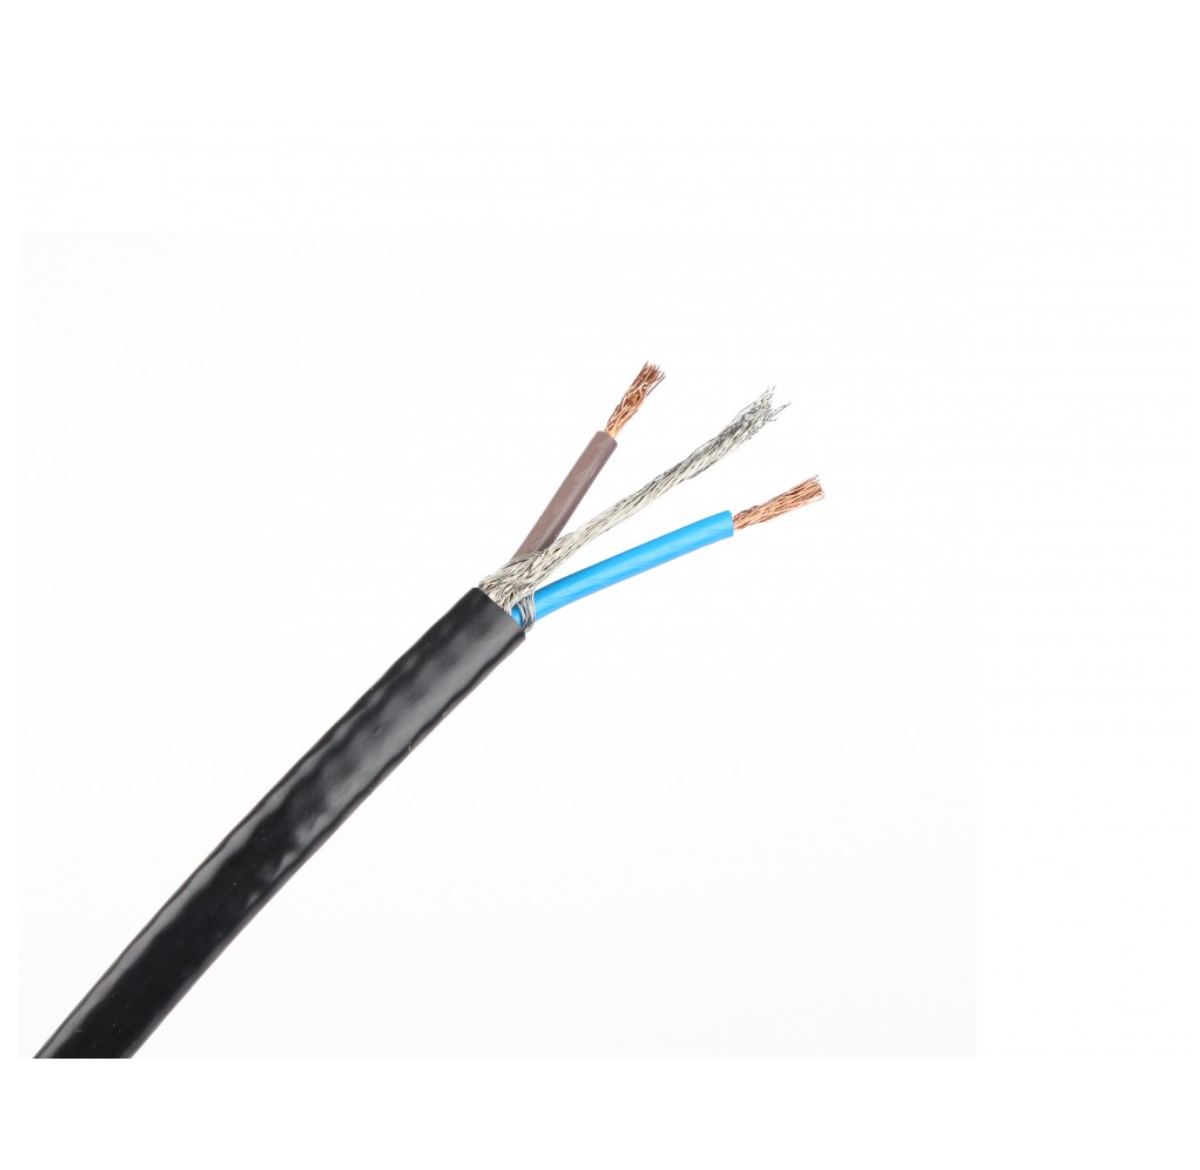 Heating cable - 40m